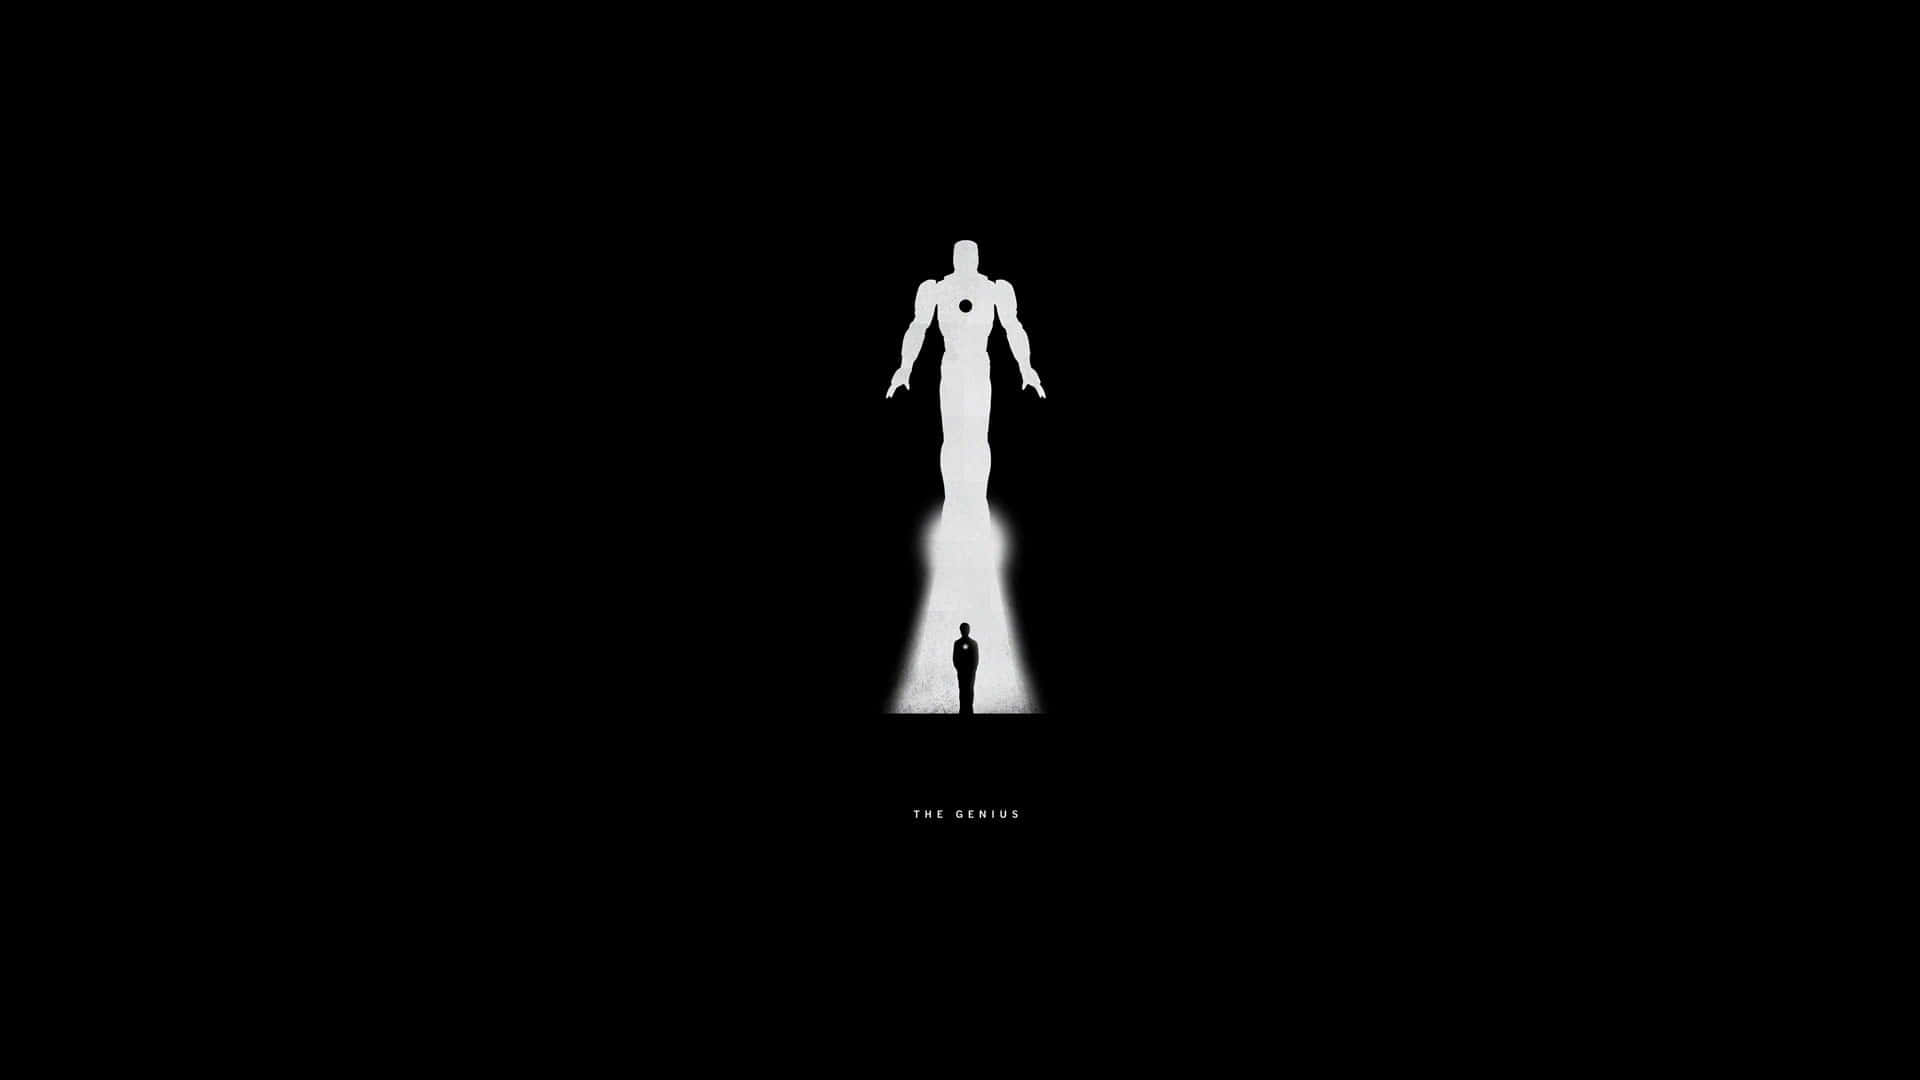 Iron Man in Black and White Wallpaper